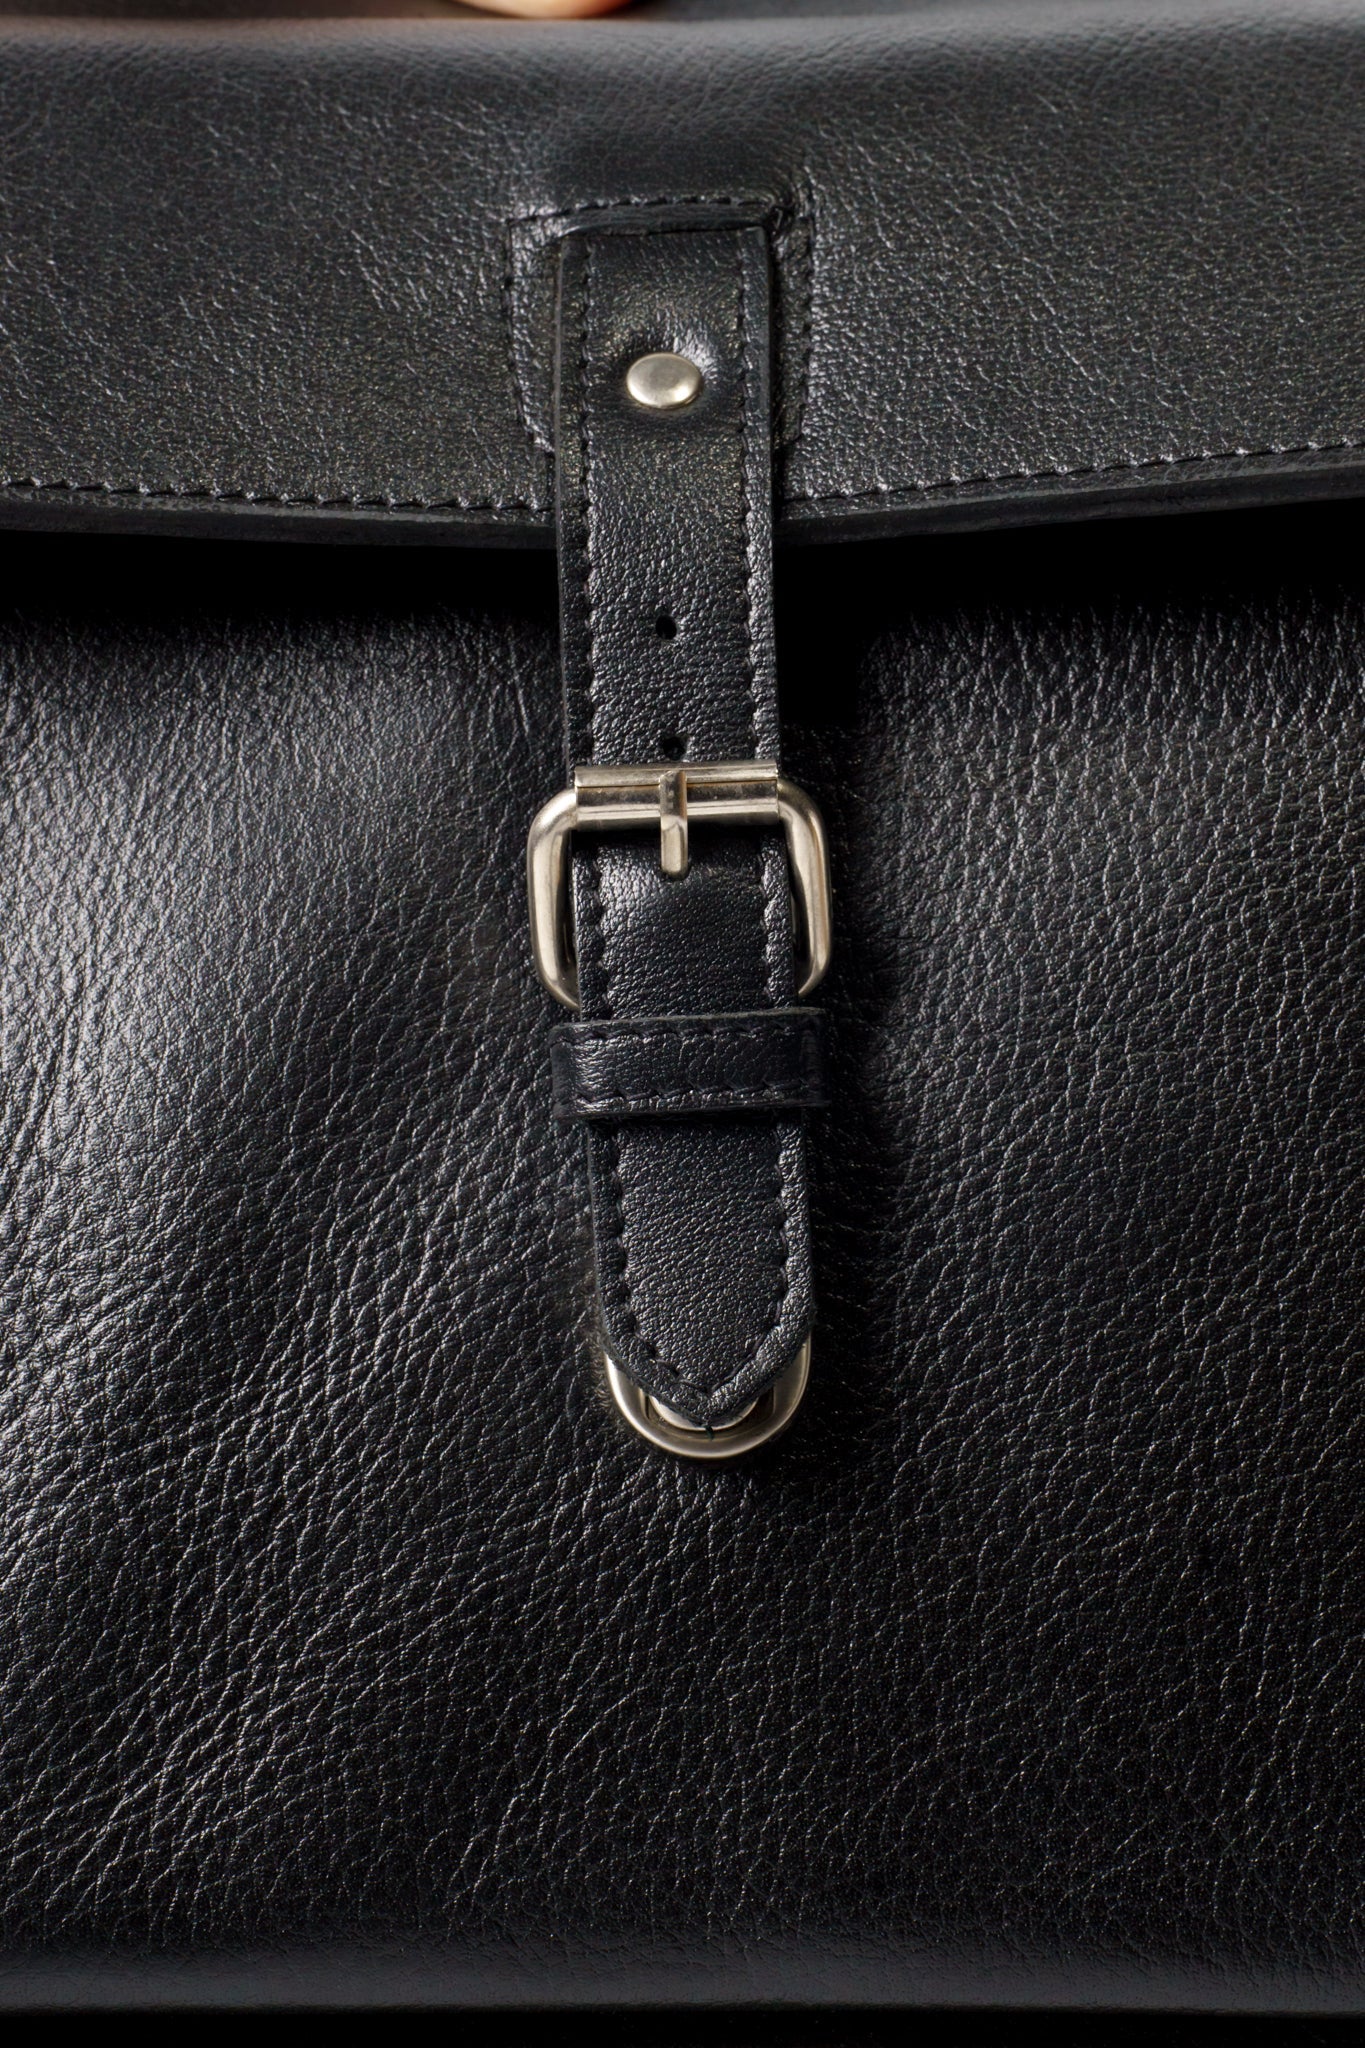 Close up of the front clasp buckle closure on Chamra's laptop bag. The imag showcases the superior stitching quality and metallic finish.